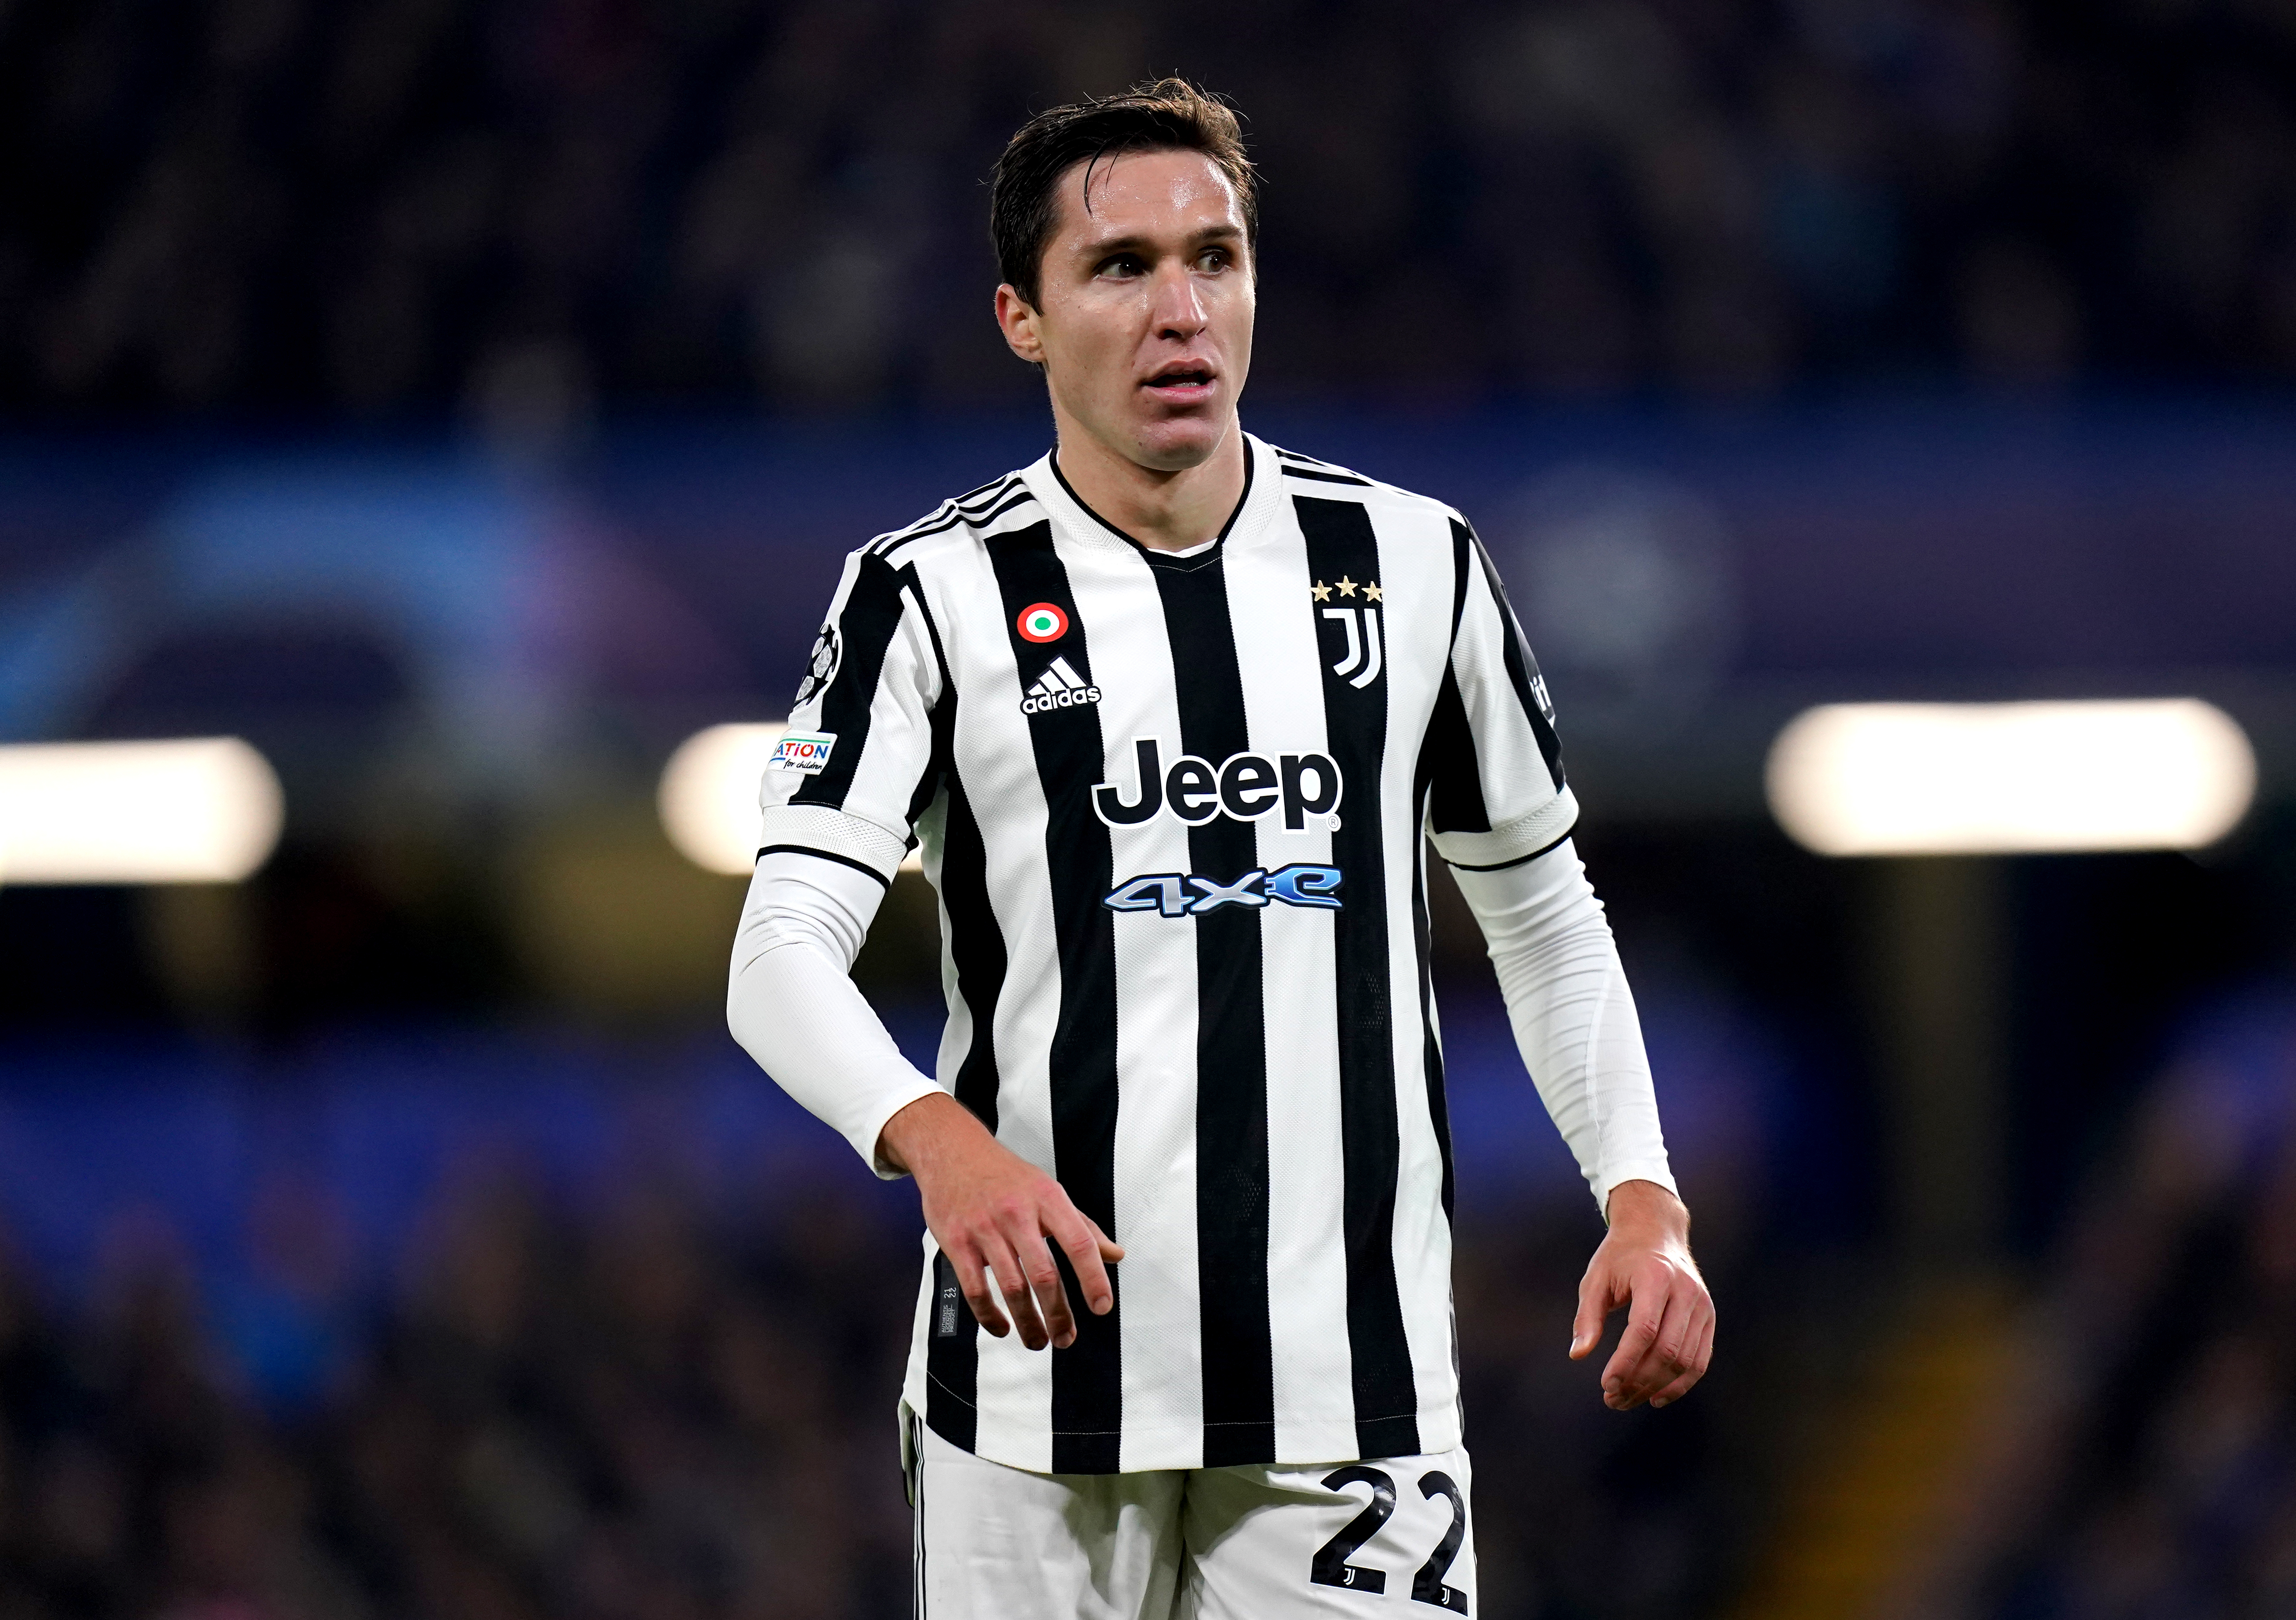 Federico Chiesa is a rumoured summer transfer target for several Premier League clubs